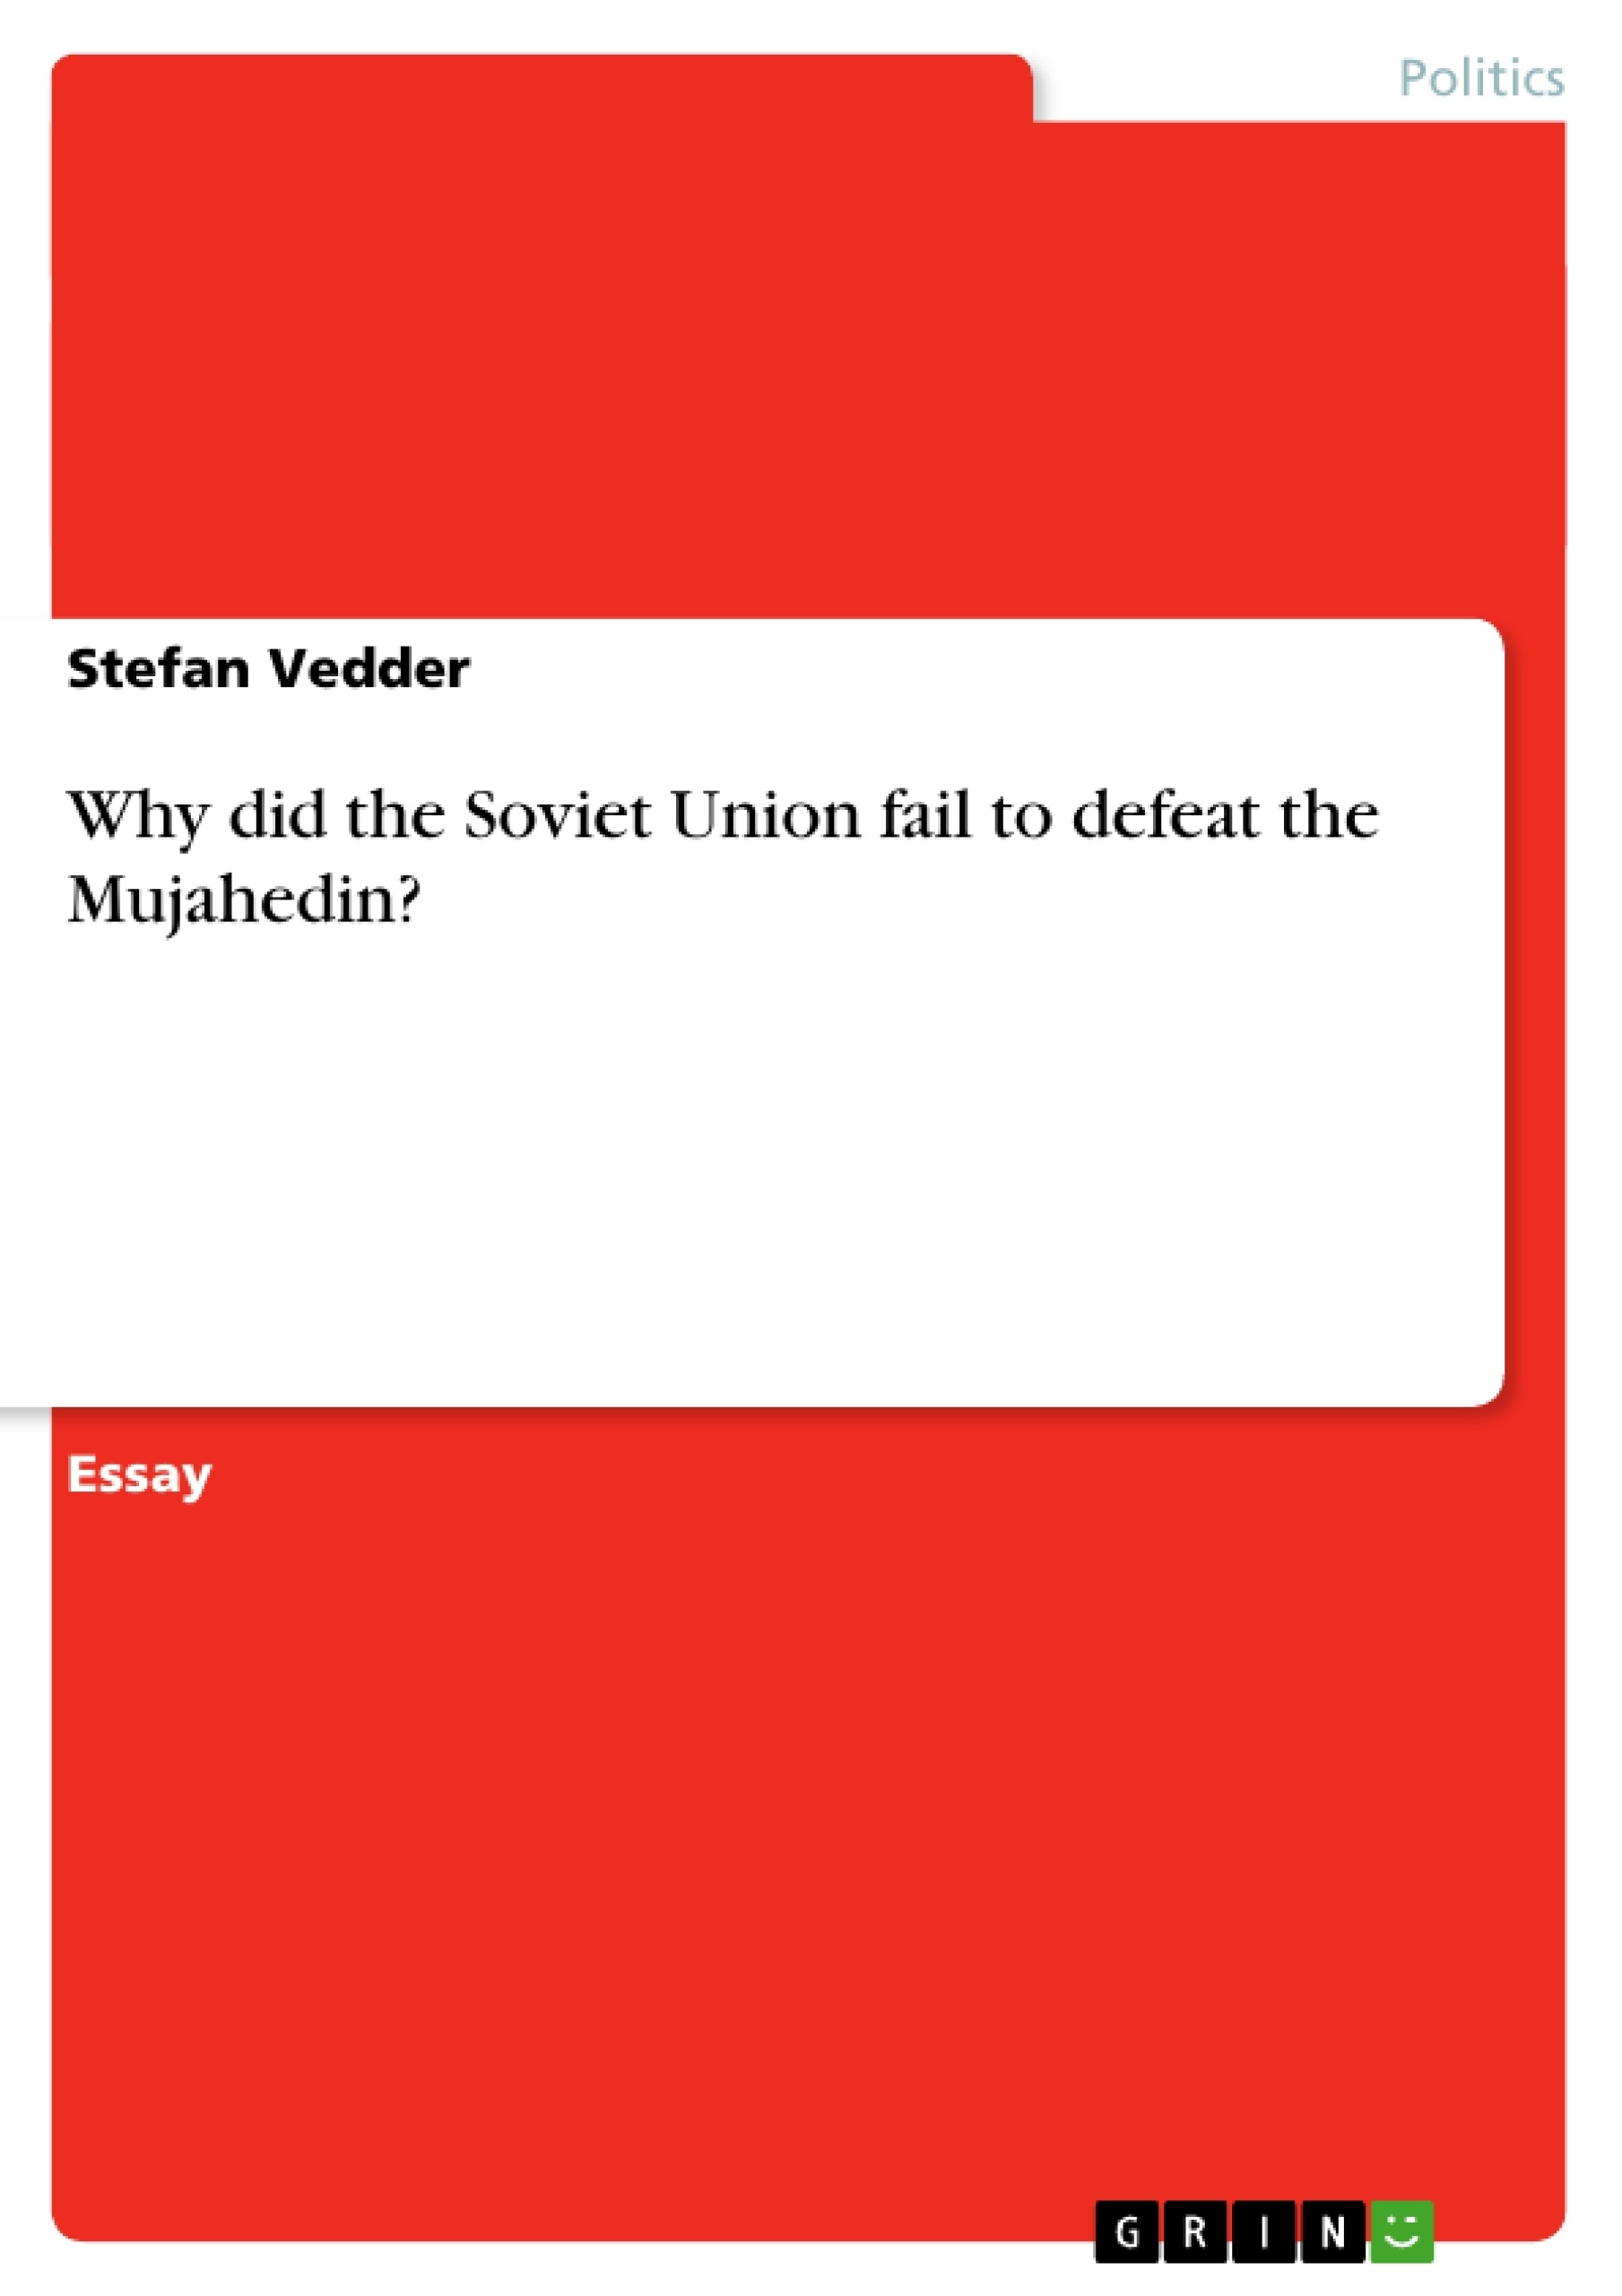 Titre: Why did the Soviet Union fail to defeat the Mujahedin?